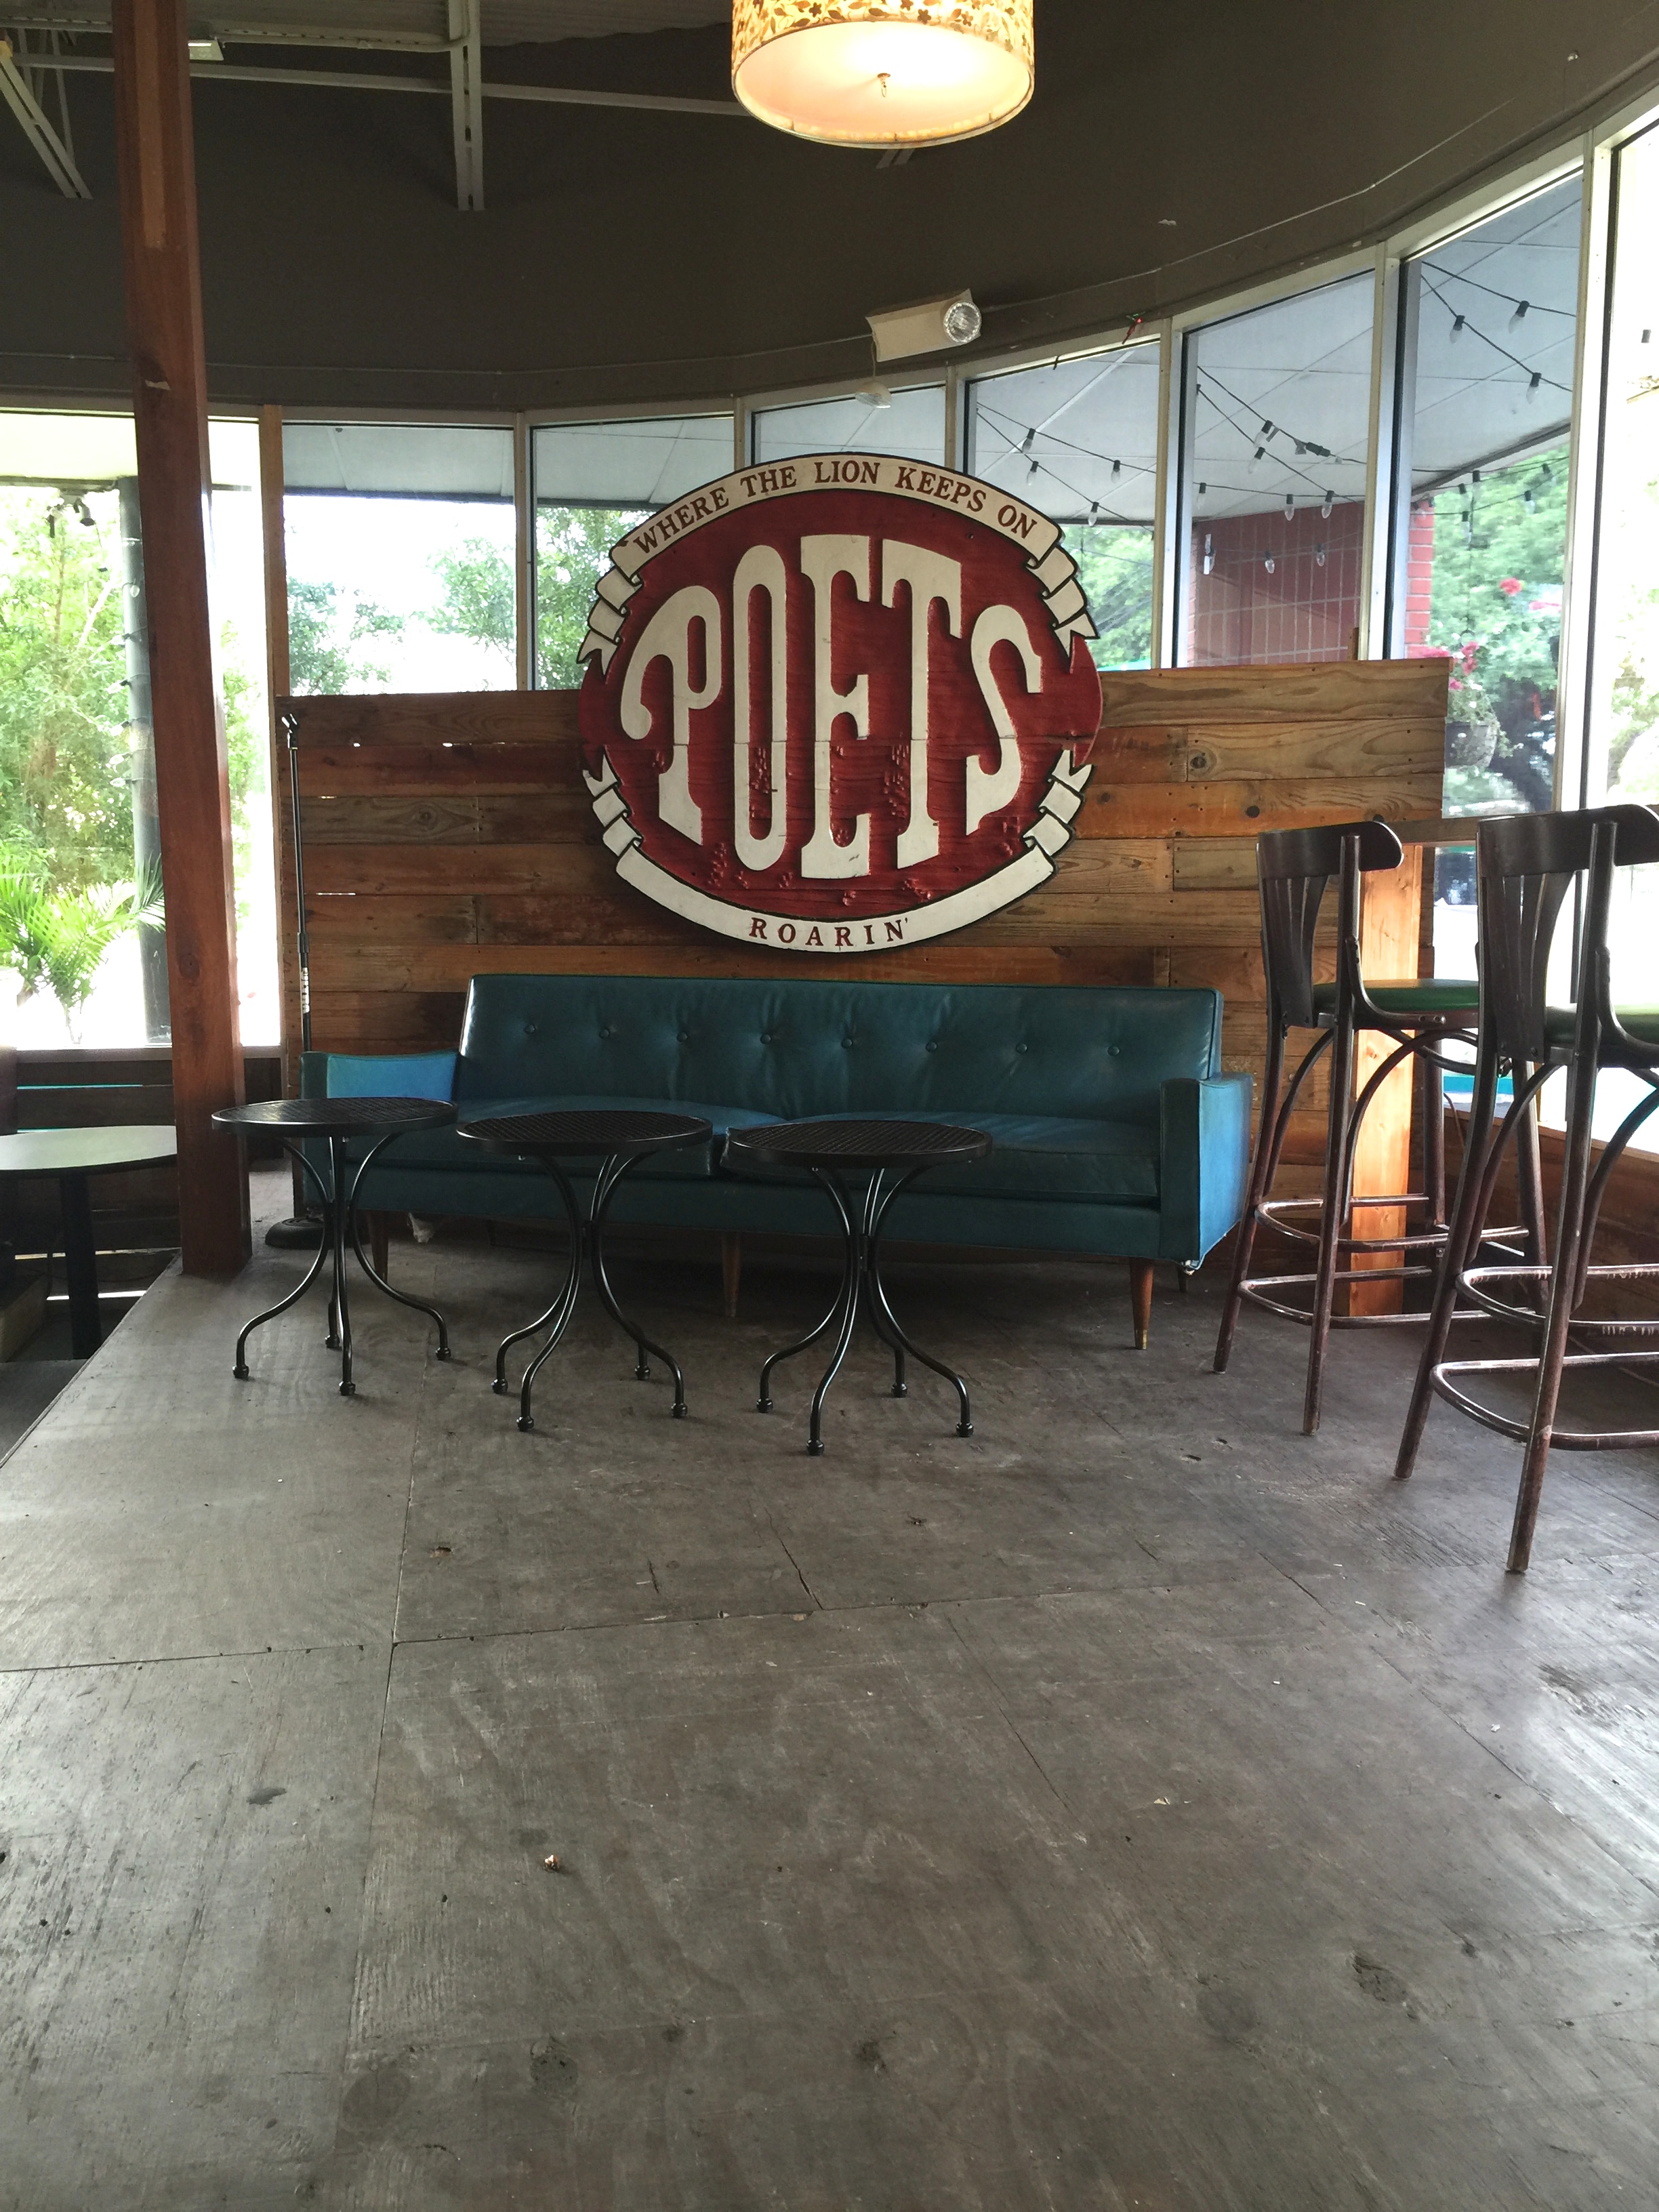 Poet’s Cafe, The Newest Coffee Lounge